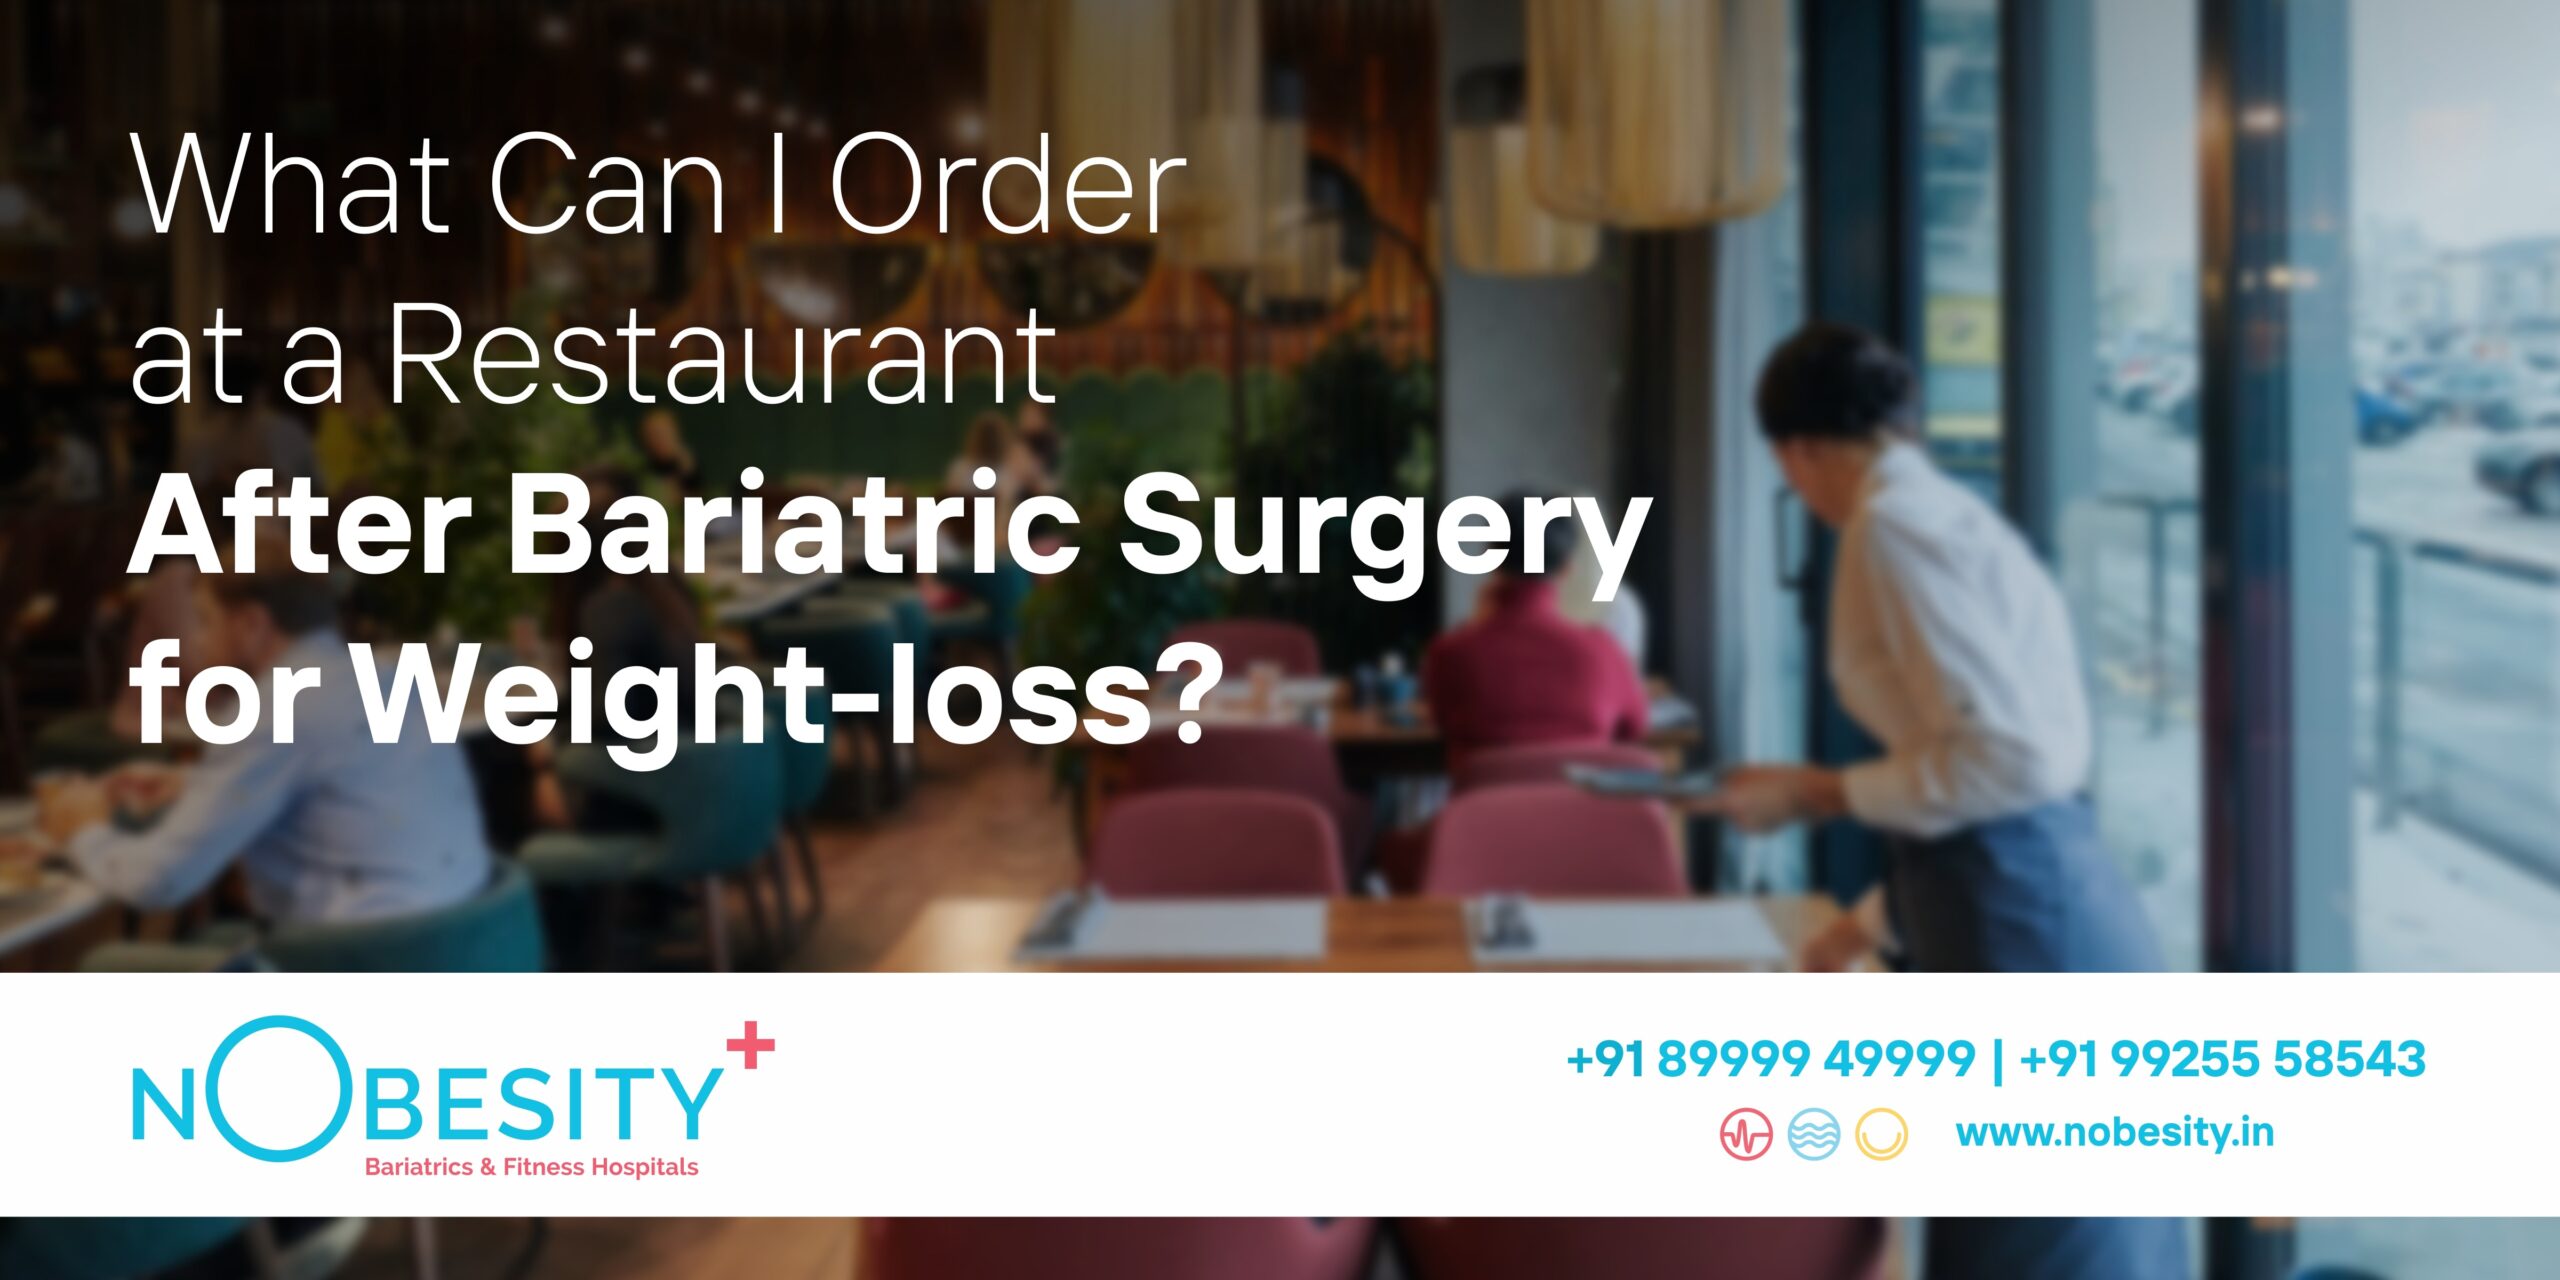 What Can I Order at a Restaurant After Bariatric Surgery for Weight-Loss?